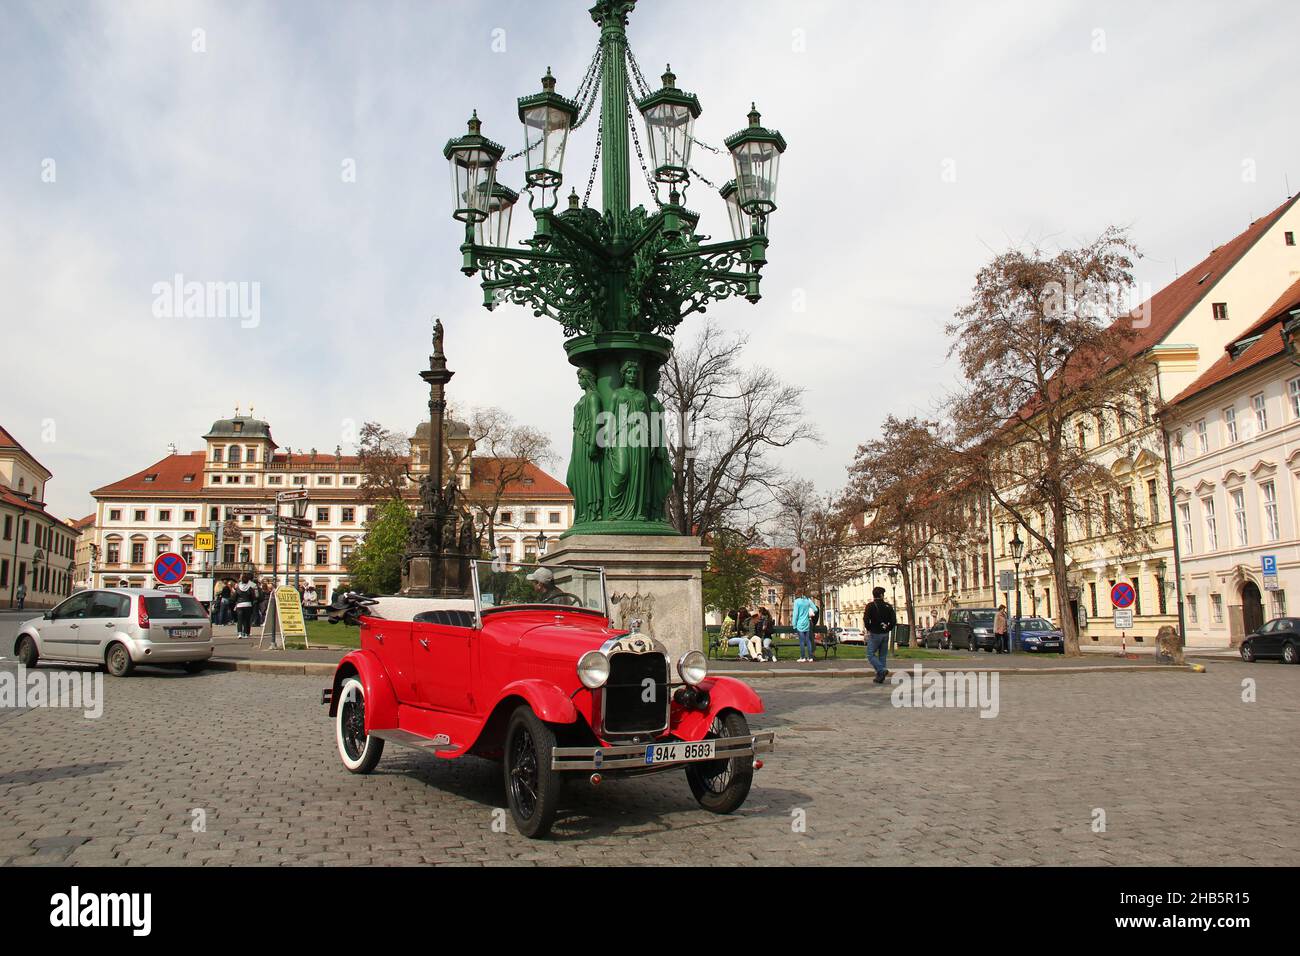 PRAGUE, CZECH - APRIL 24, 2012: This is a retro car Ford A on Hradcany Square awaiting passengers. Stock Photo